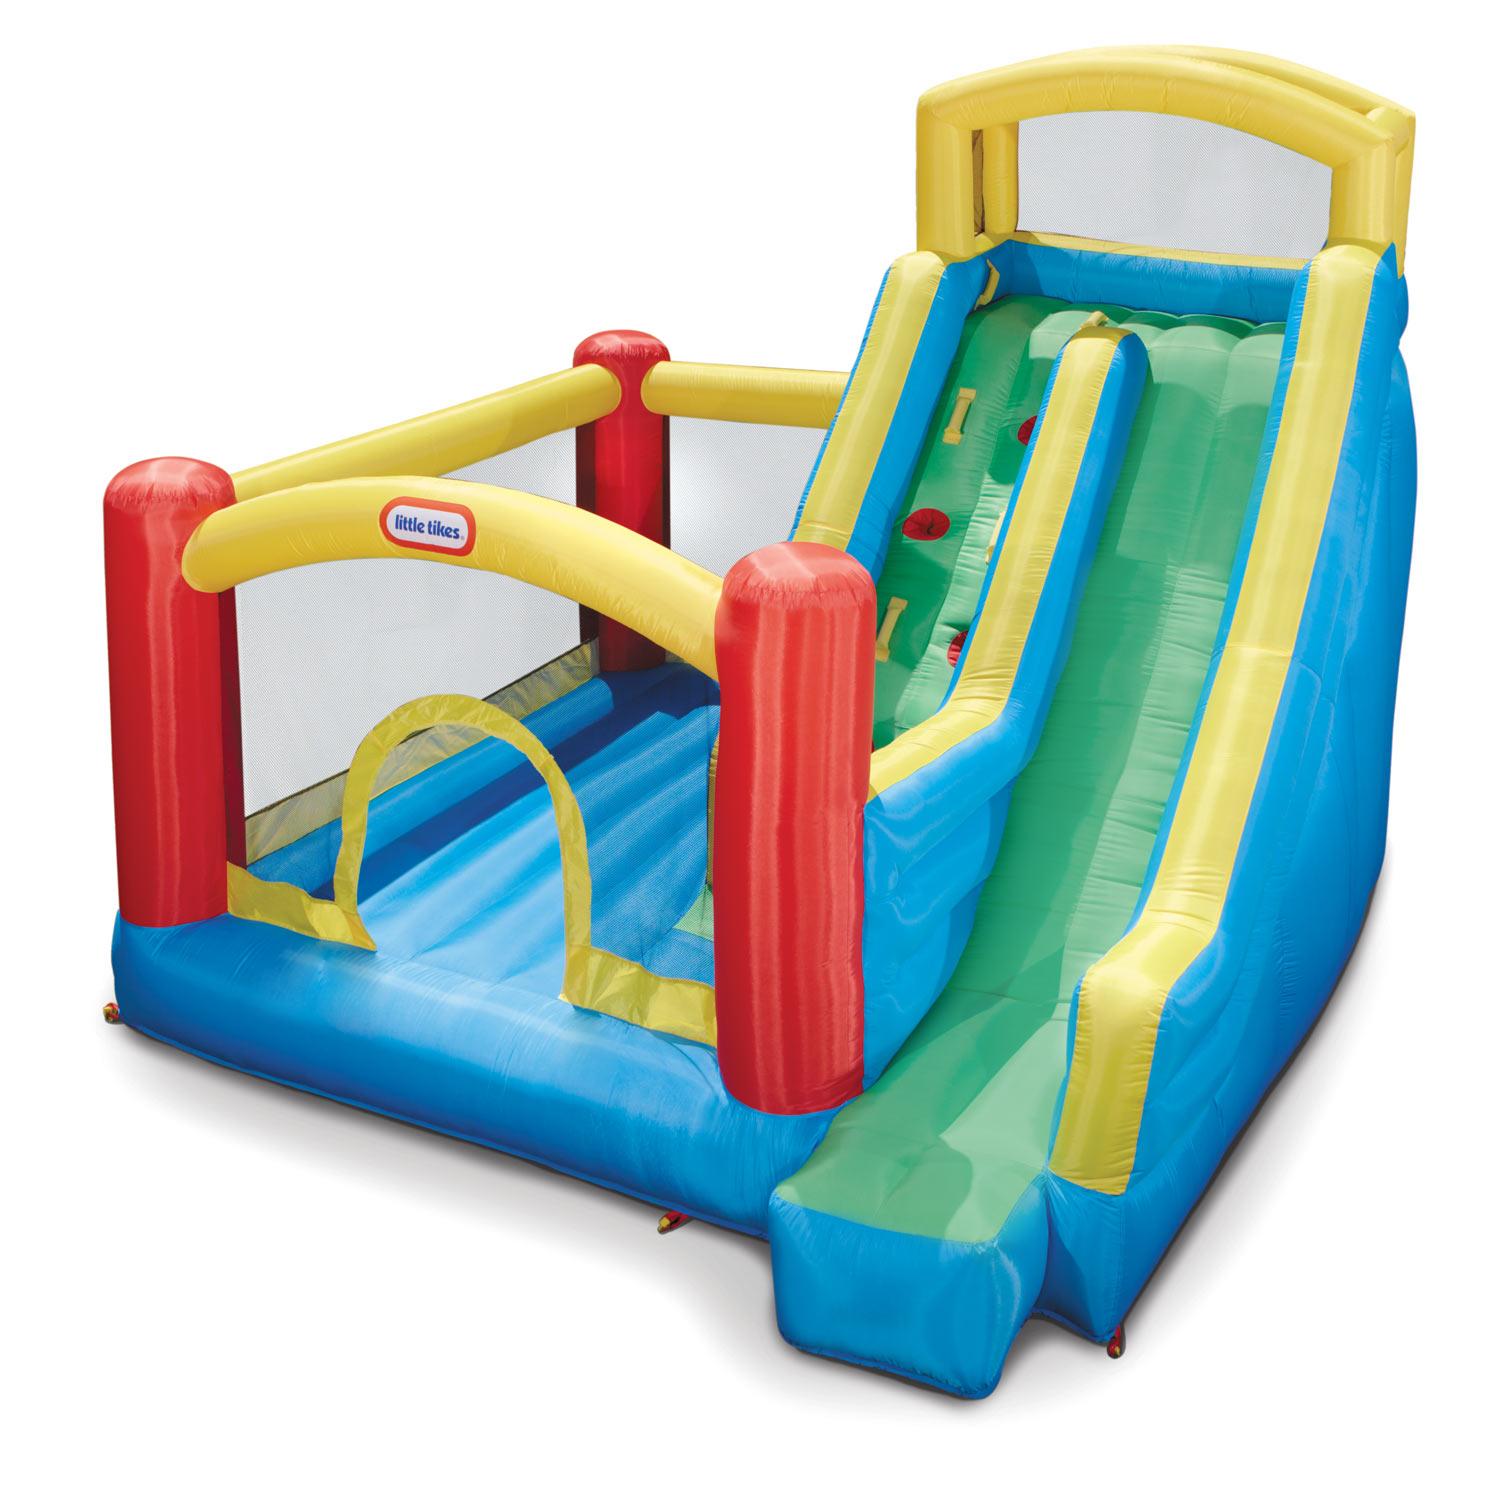 Little Tikes Giant Slide Bouncer Inflatable Bounce House with Blower and Climbing Wall, Fits up to 3 Kids, Multicolor, Outdoor Backyard Toy for Boys Girls Ages 3 4 5+ to 8 Year Old - image 1 of 6